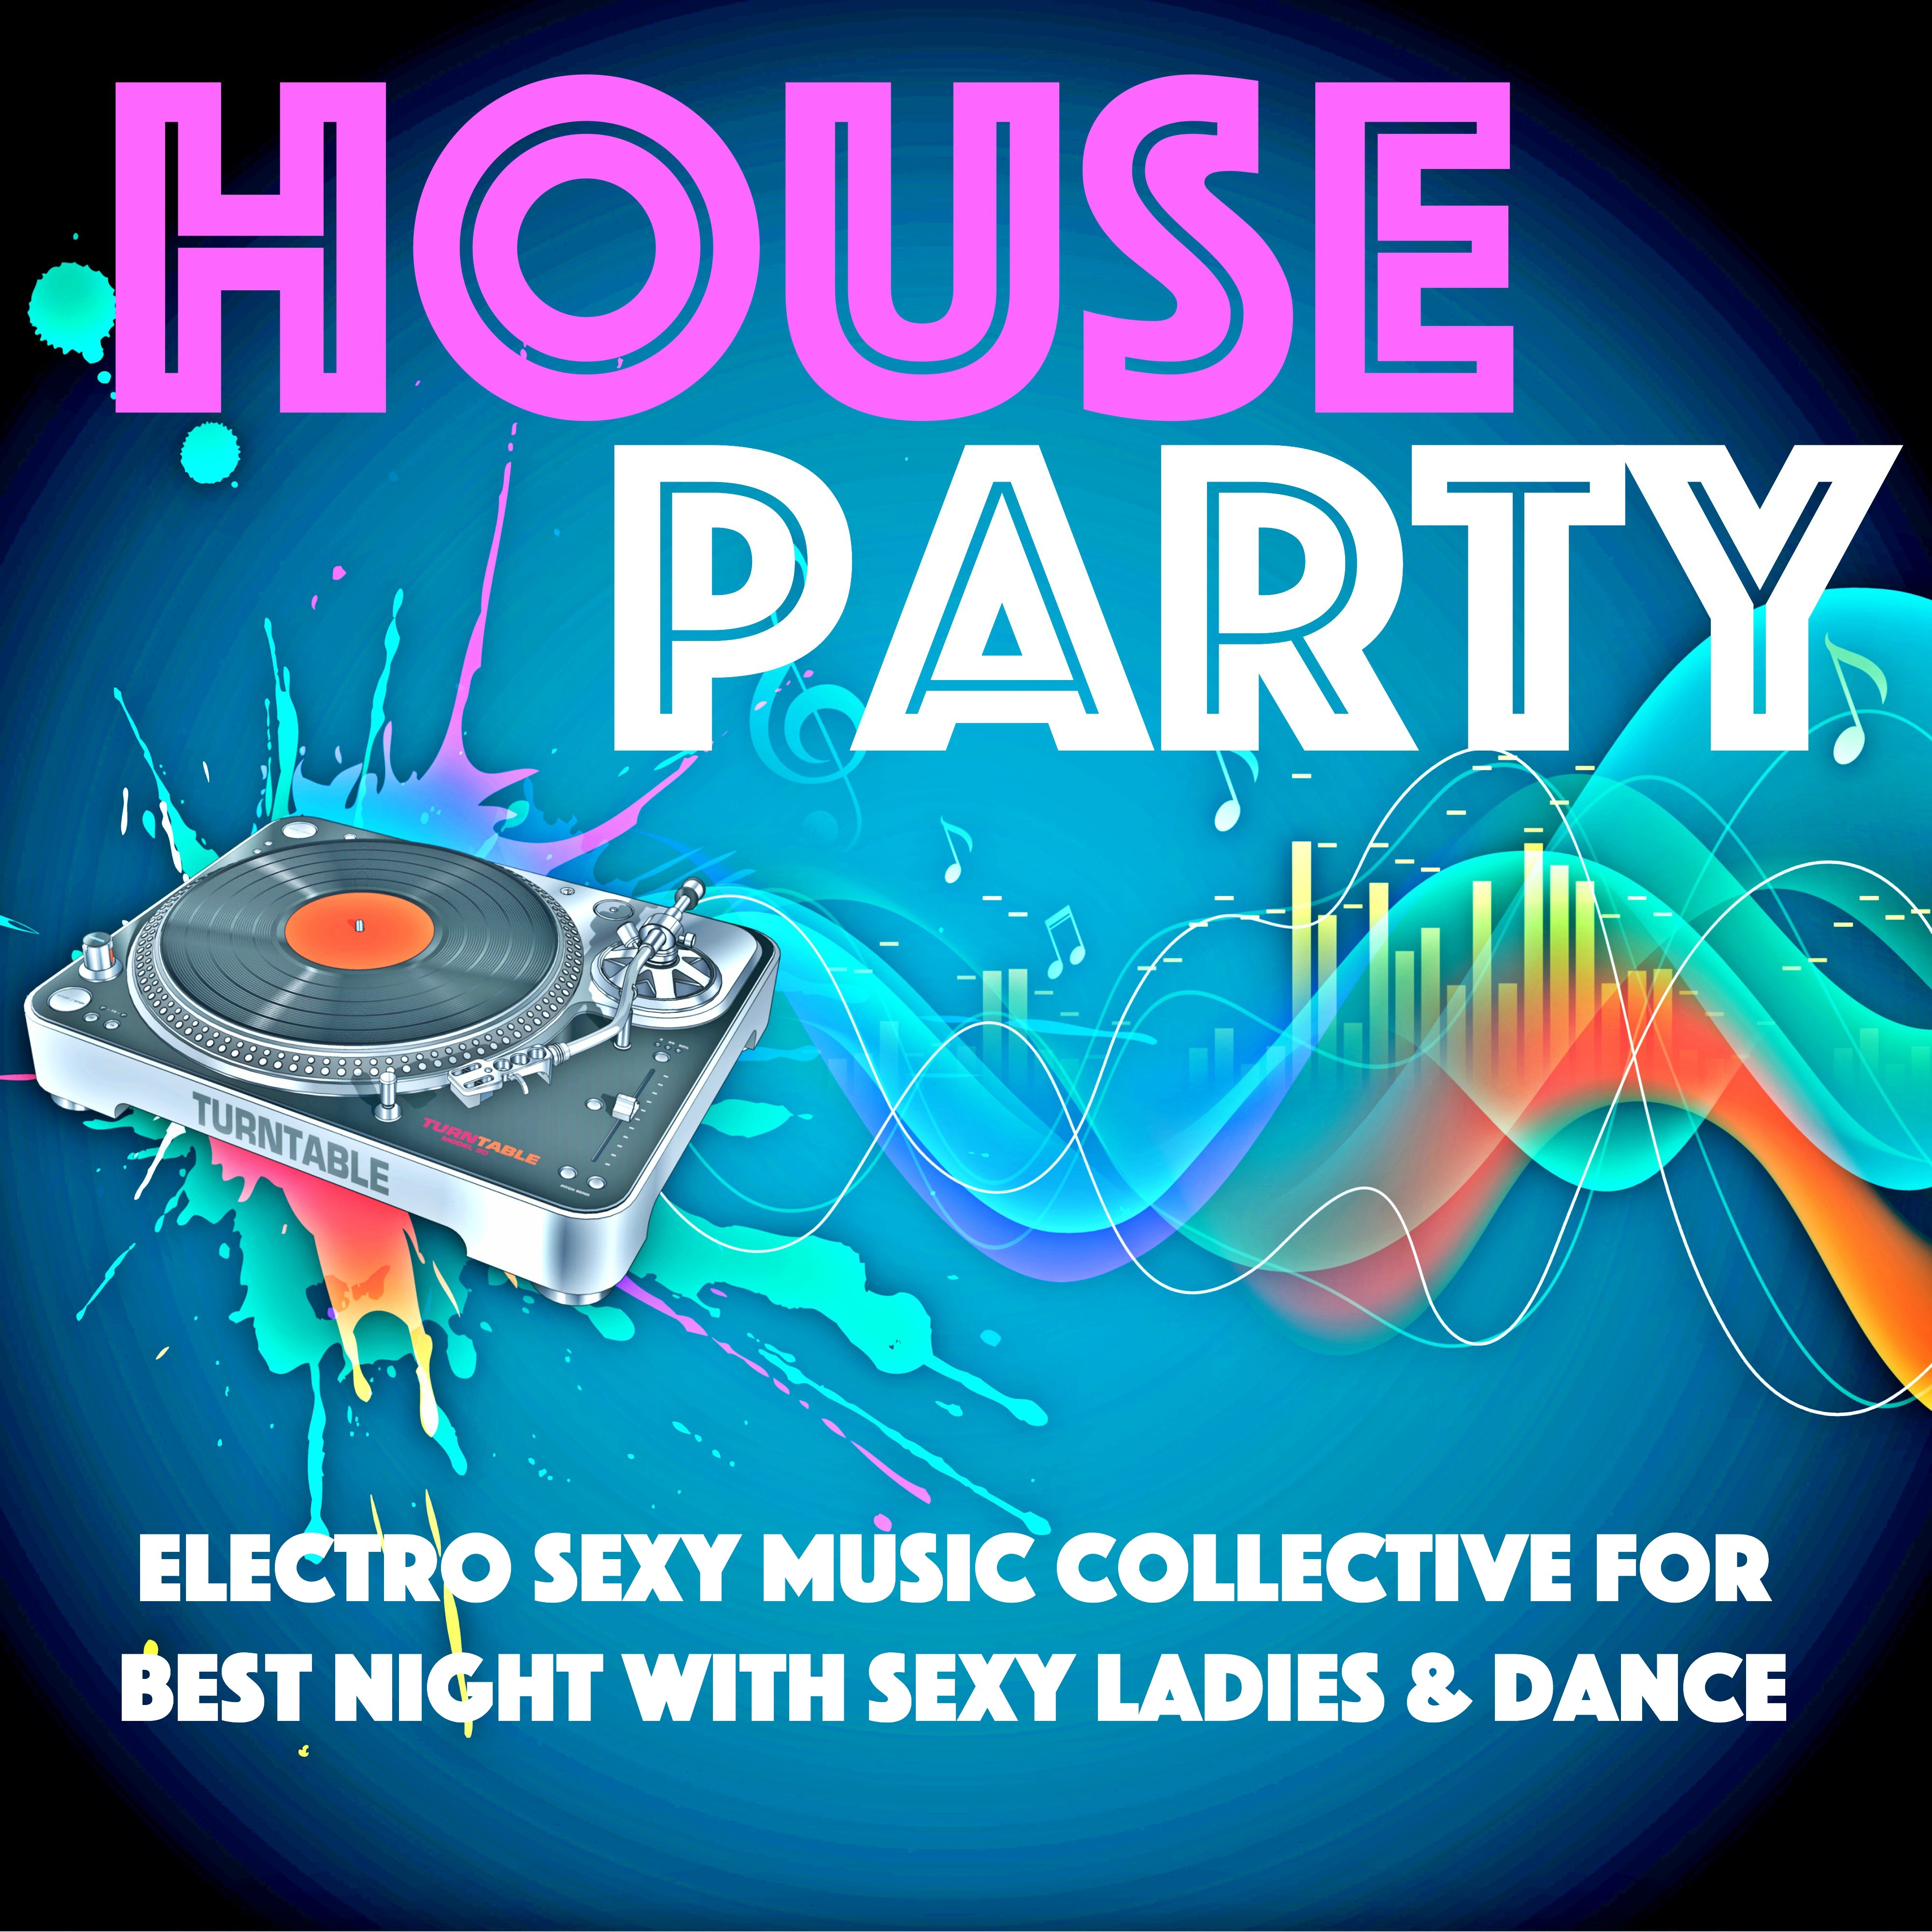 House Party - Electro **** Music Collective for Best Night with **** Ladies & Dance